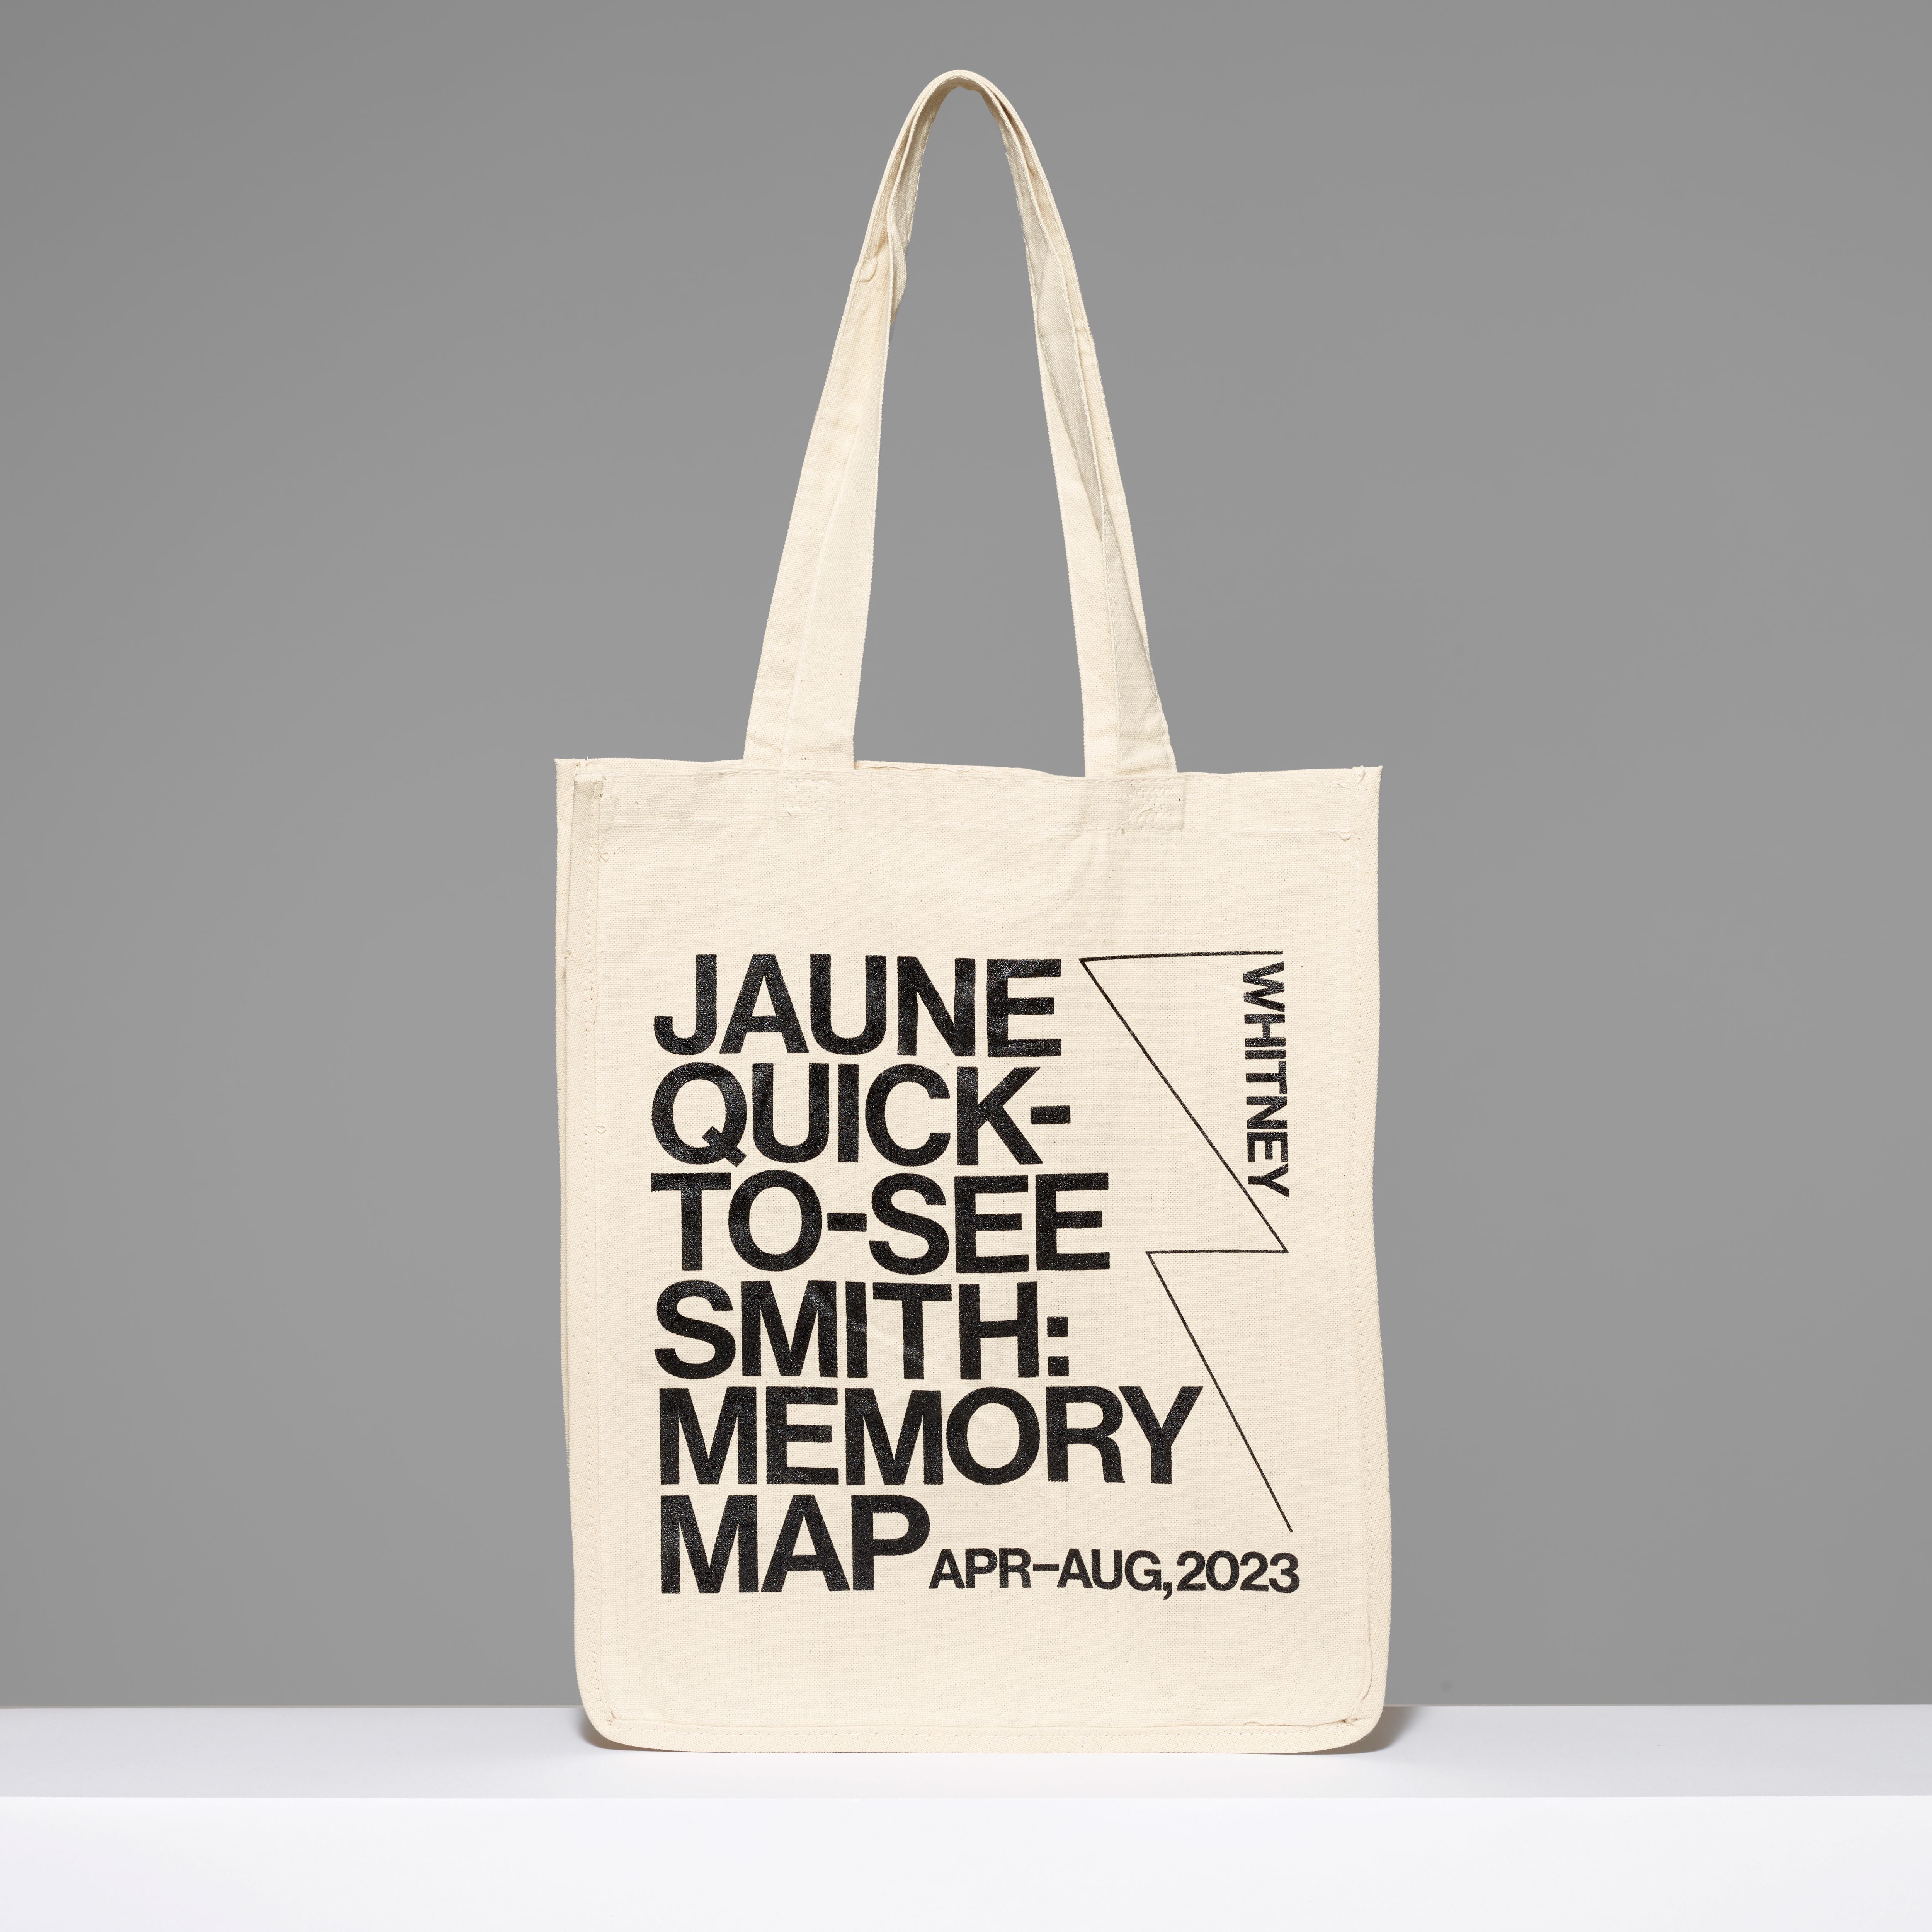 100% cotton canvas tote featuring the exhibition name Jaune Quick-to-See Smith: Memory Map, the dates, and Whitney logo in black text. Measures 17" H x 14" L x 7" W